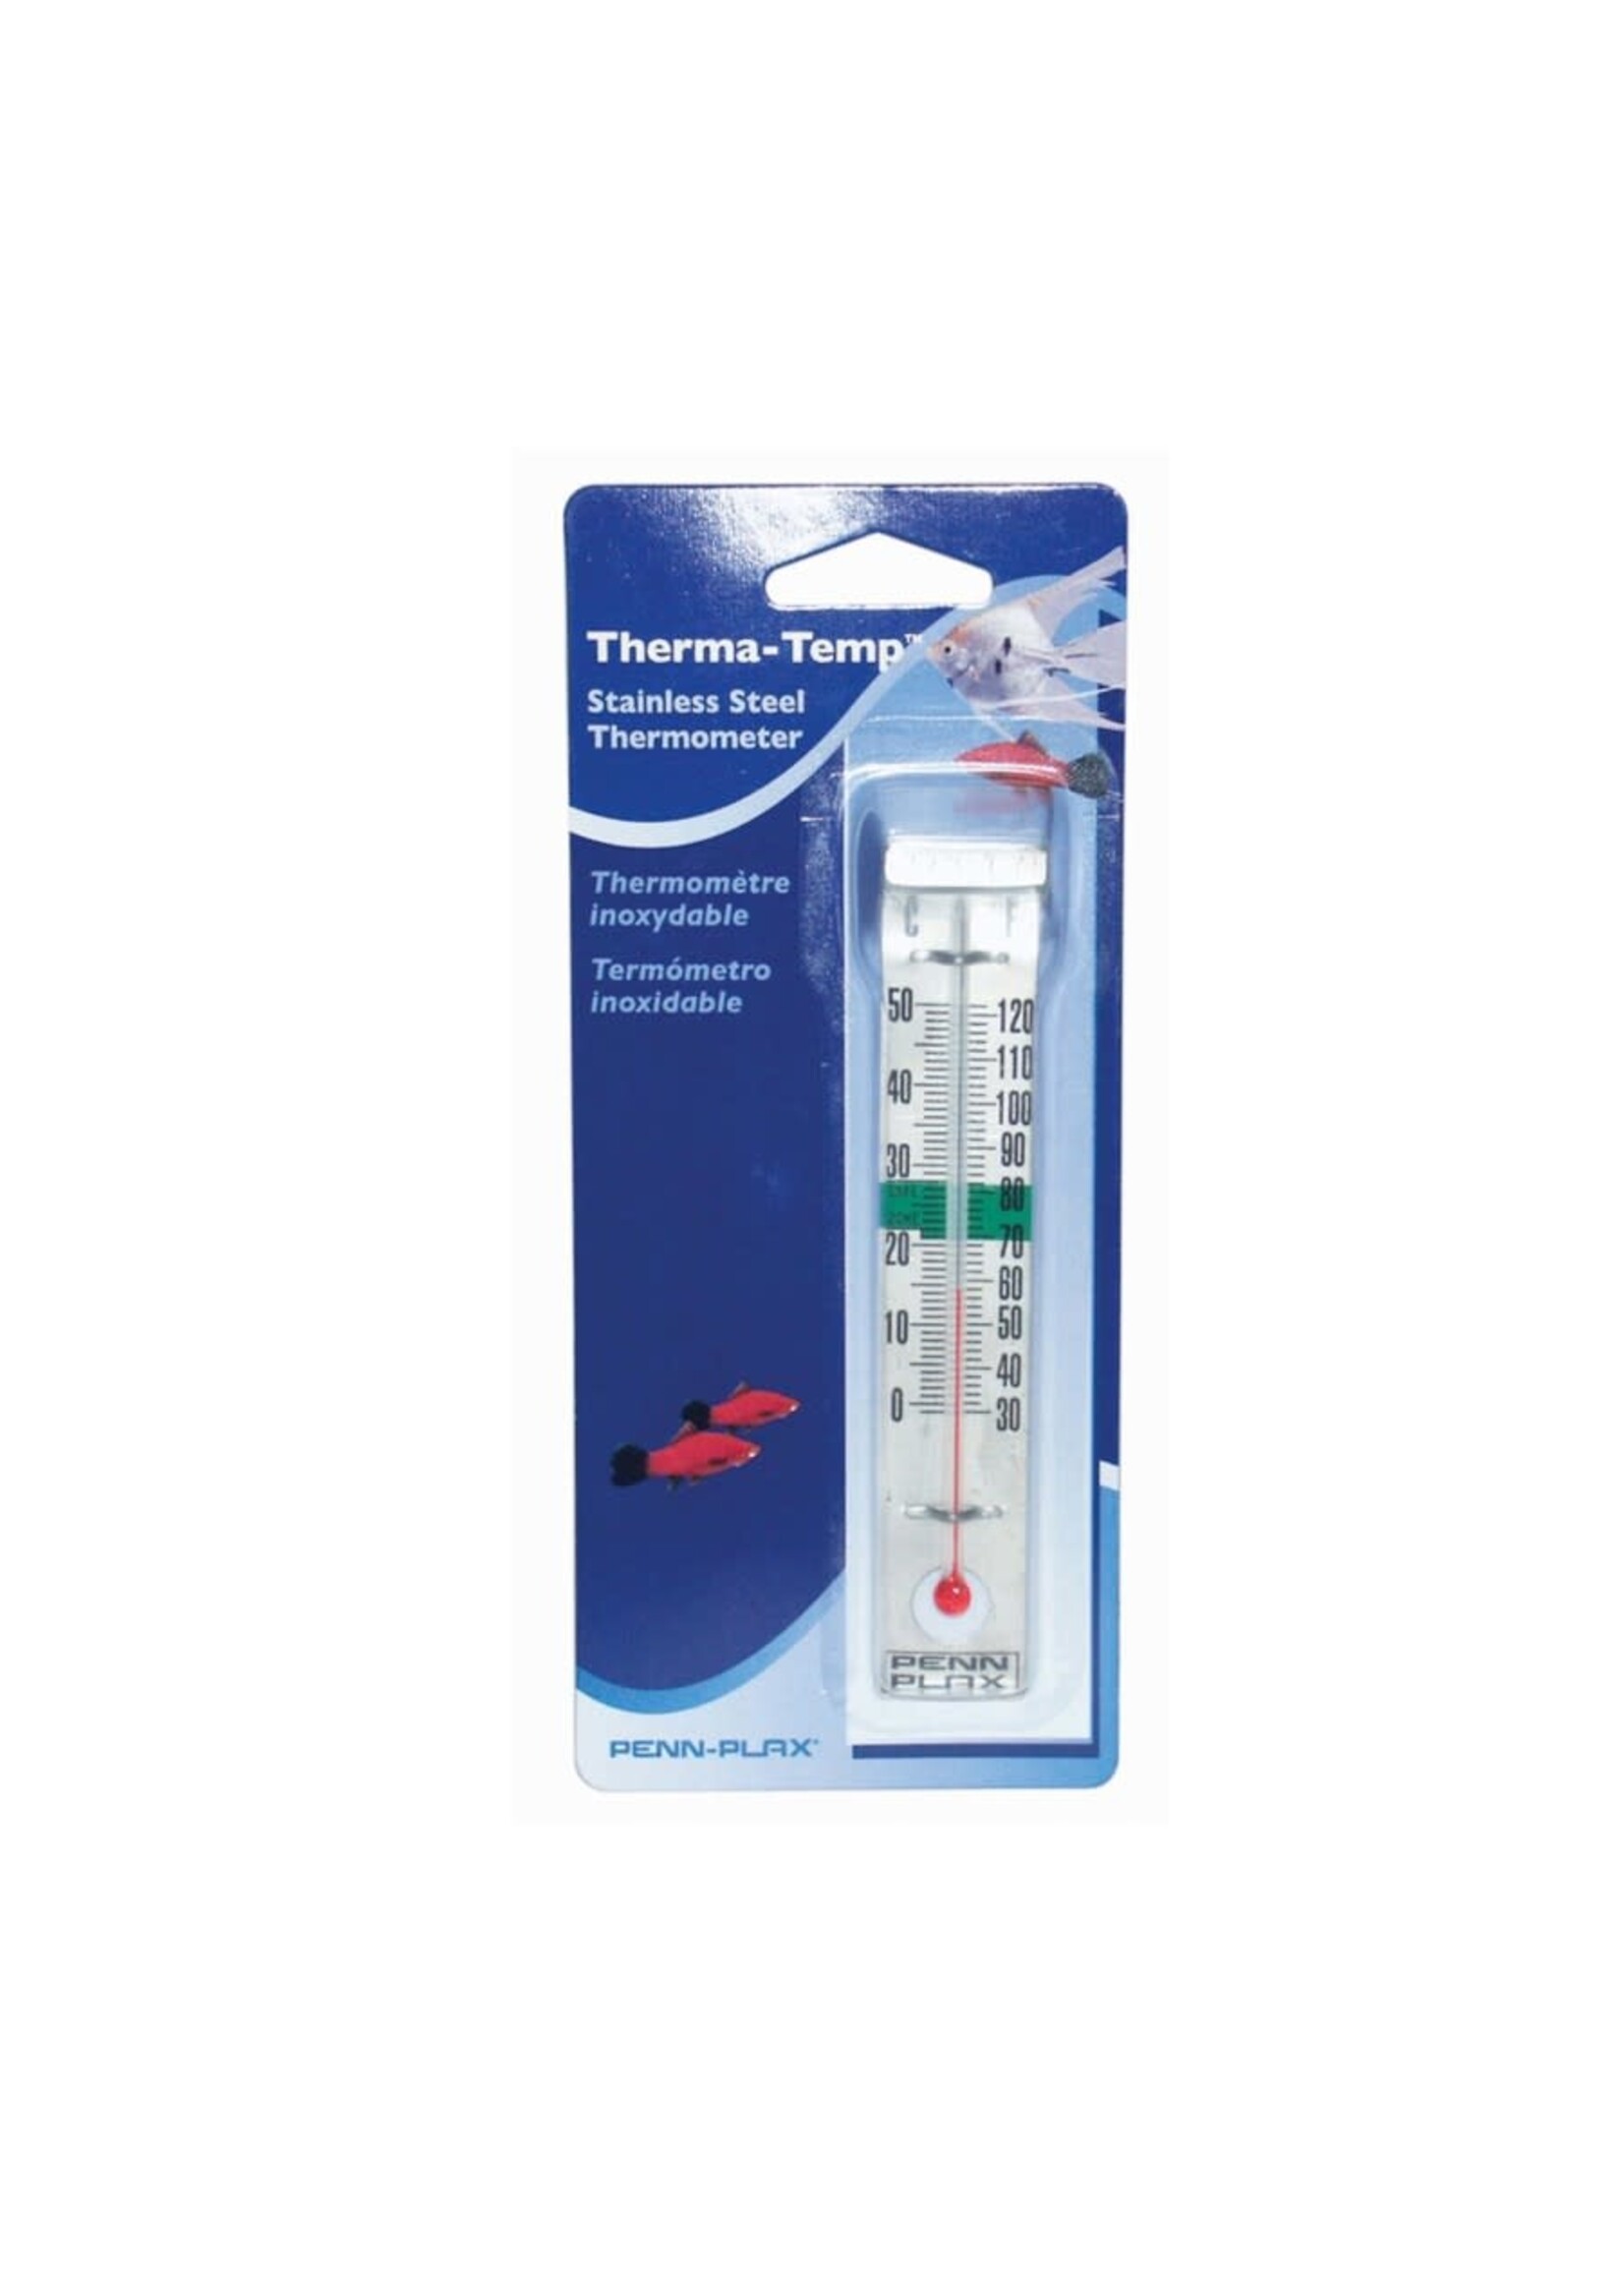 Penn Plax THERMOMETER STAINLESS STEEL